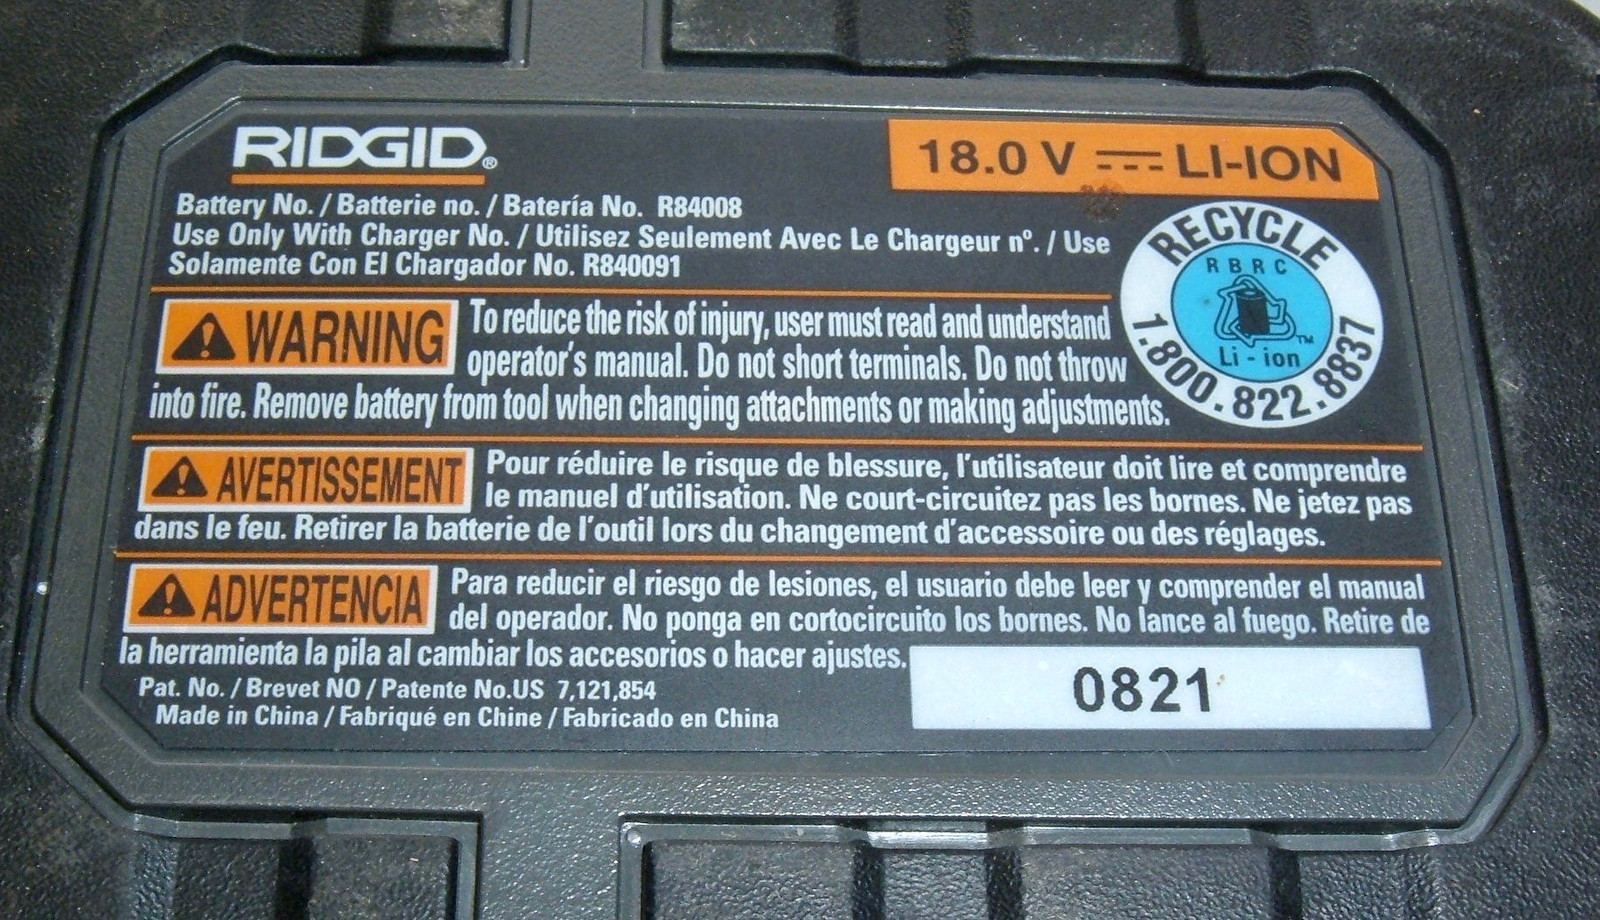 Blog - How to know the date code of your SANYO 18650 batteries